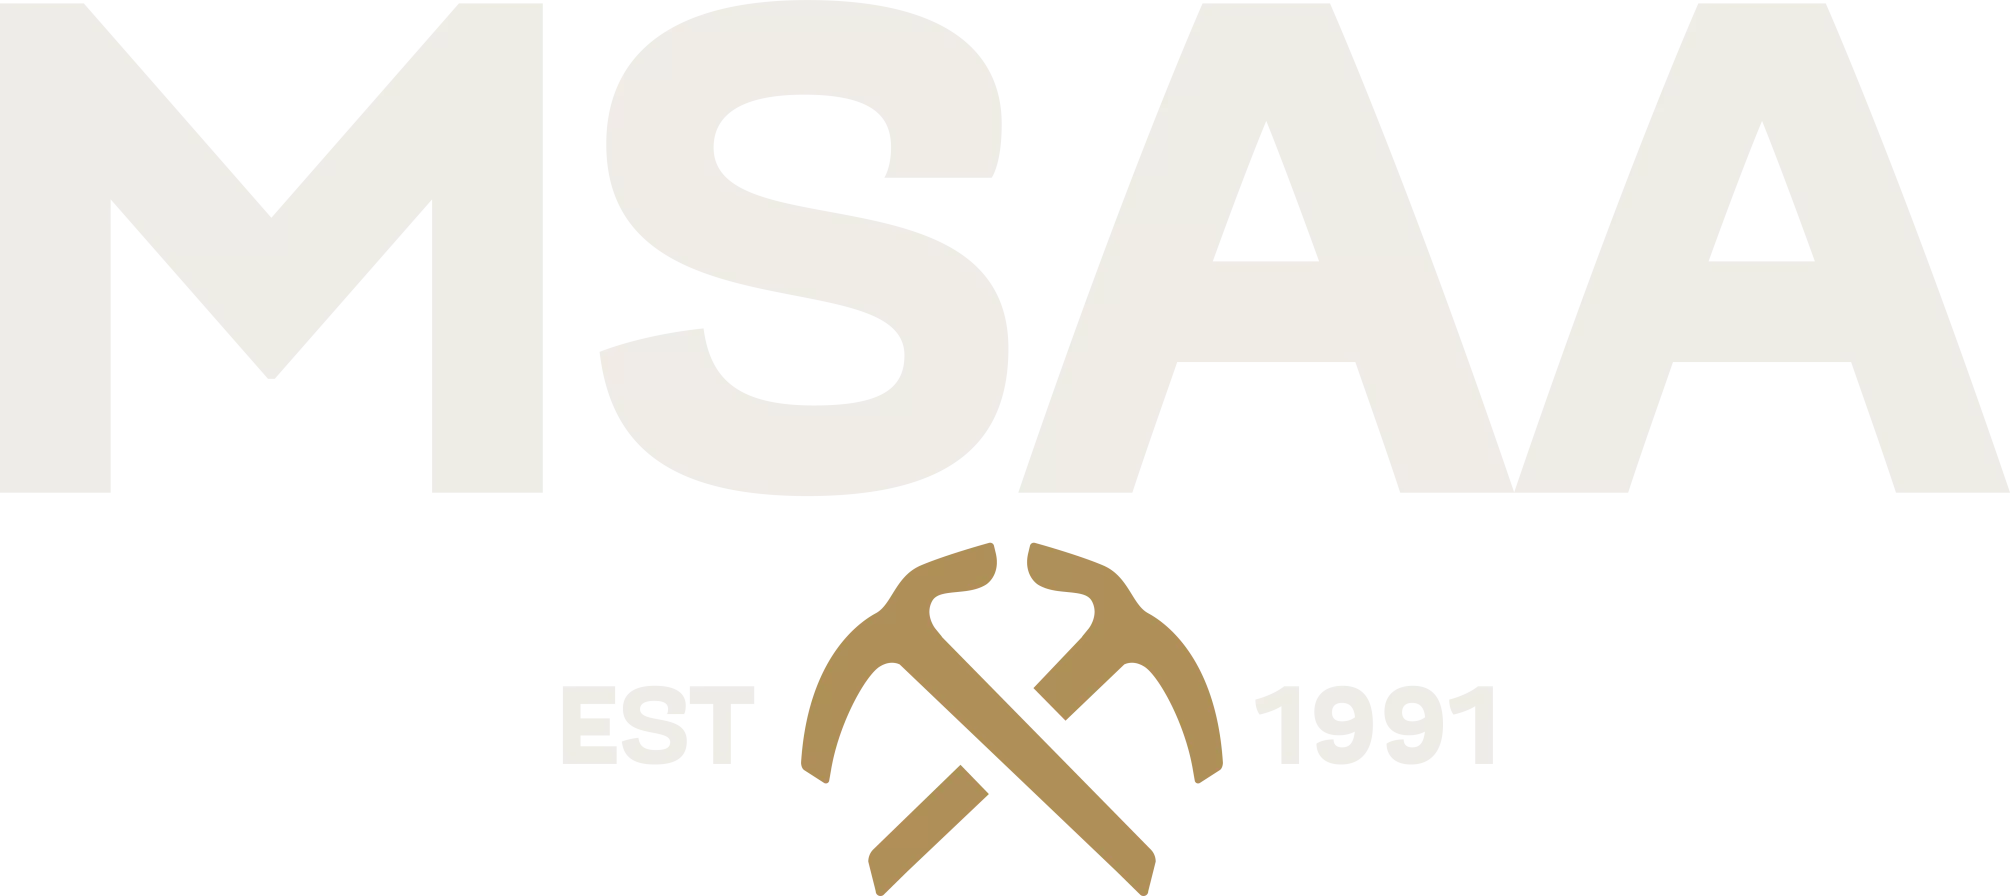 The msaa logo on a white background with a hint of Canada.